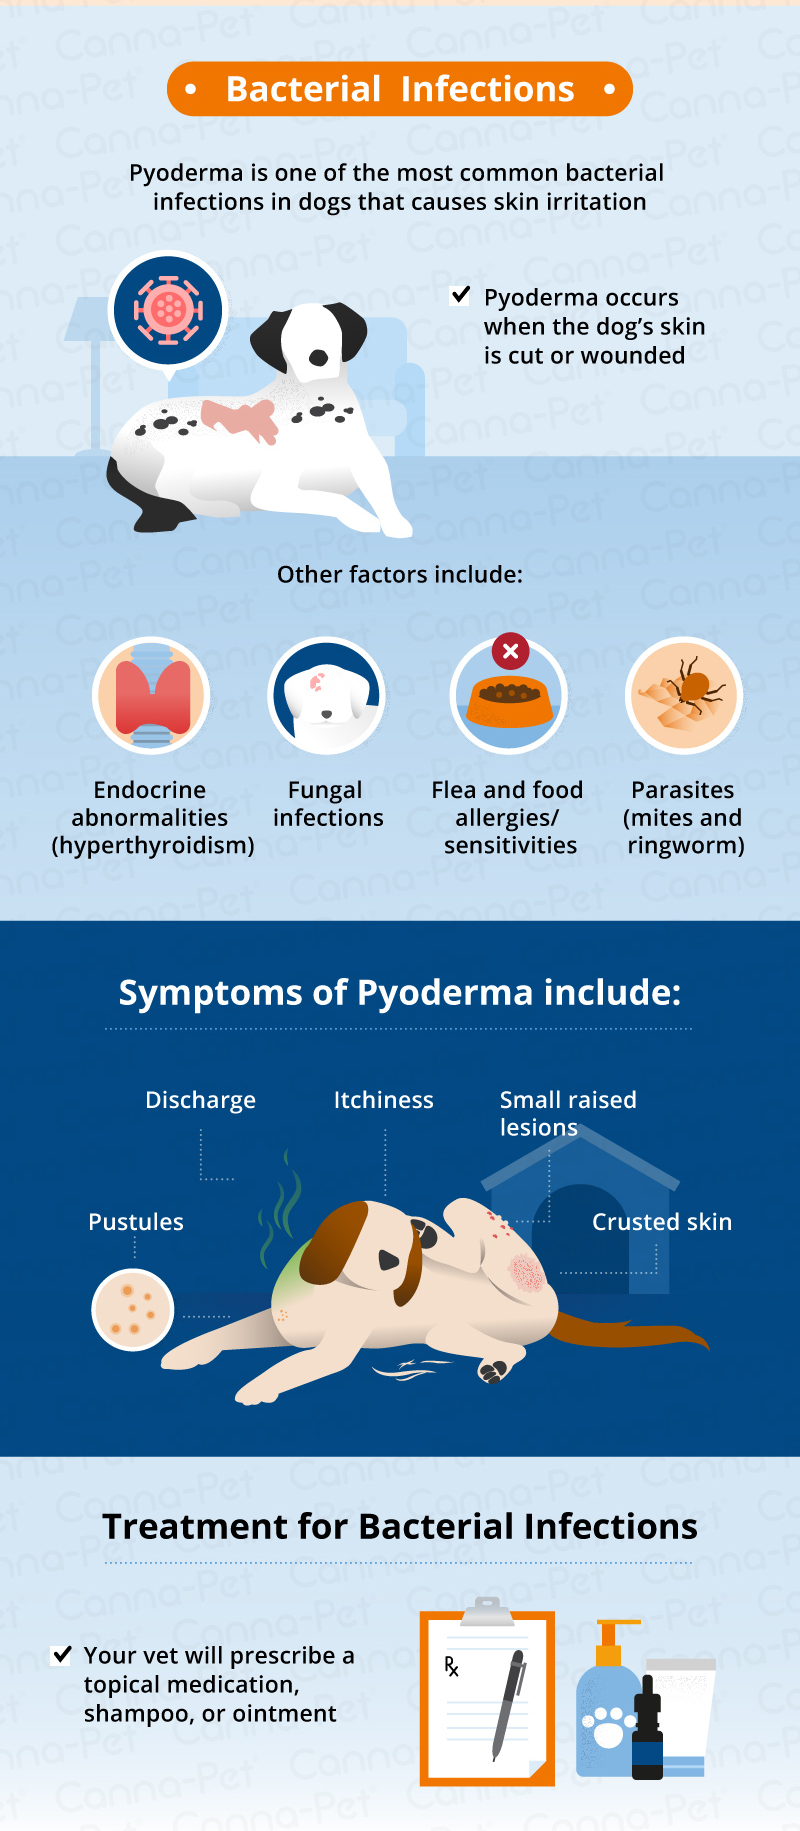 Bacterial infections in dogs